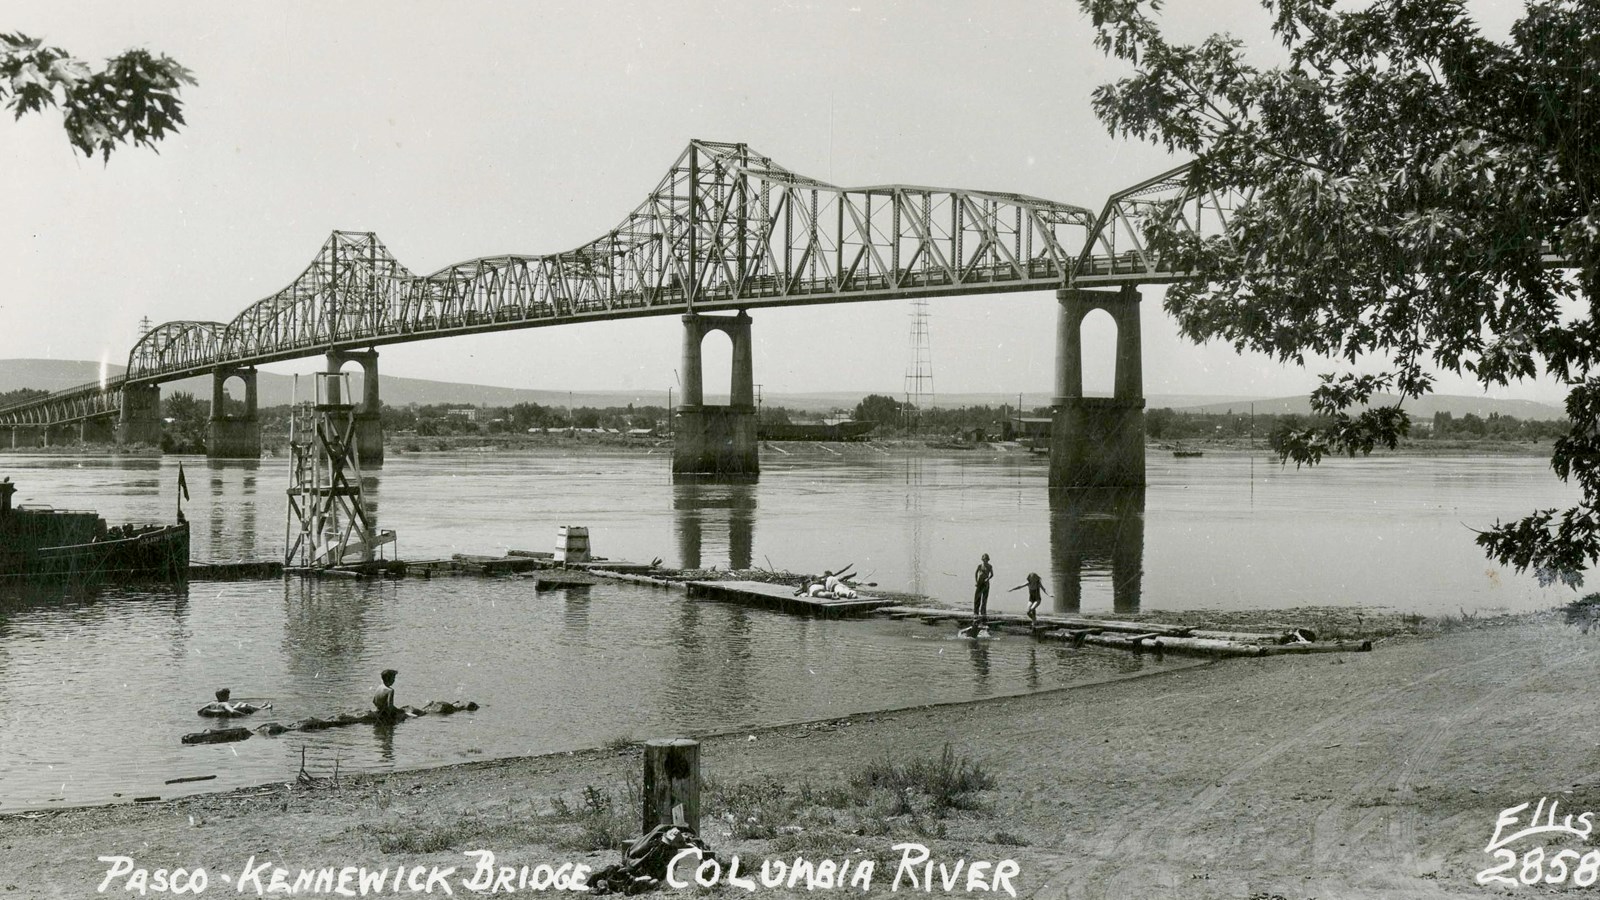 A black and white photo of a bridge spanning a large river. There are people playing in the river.